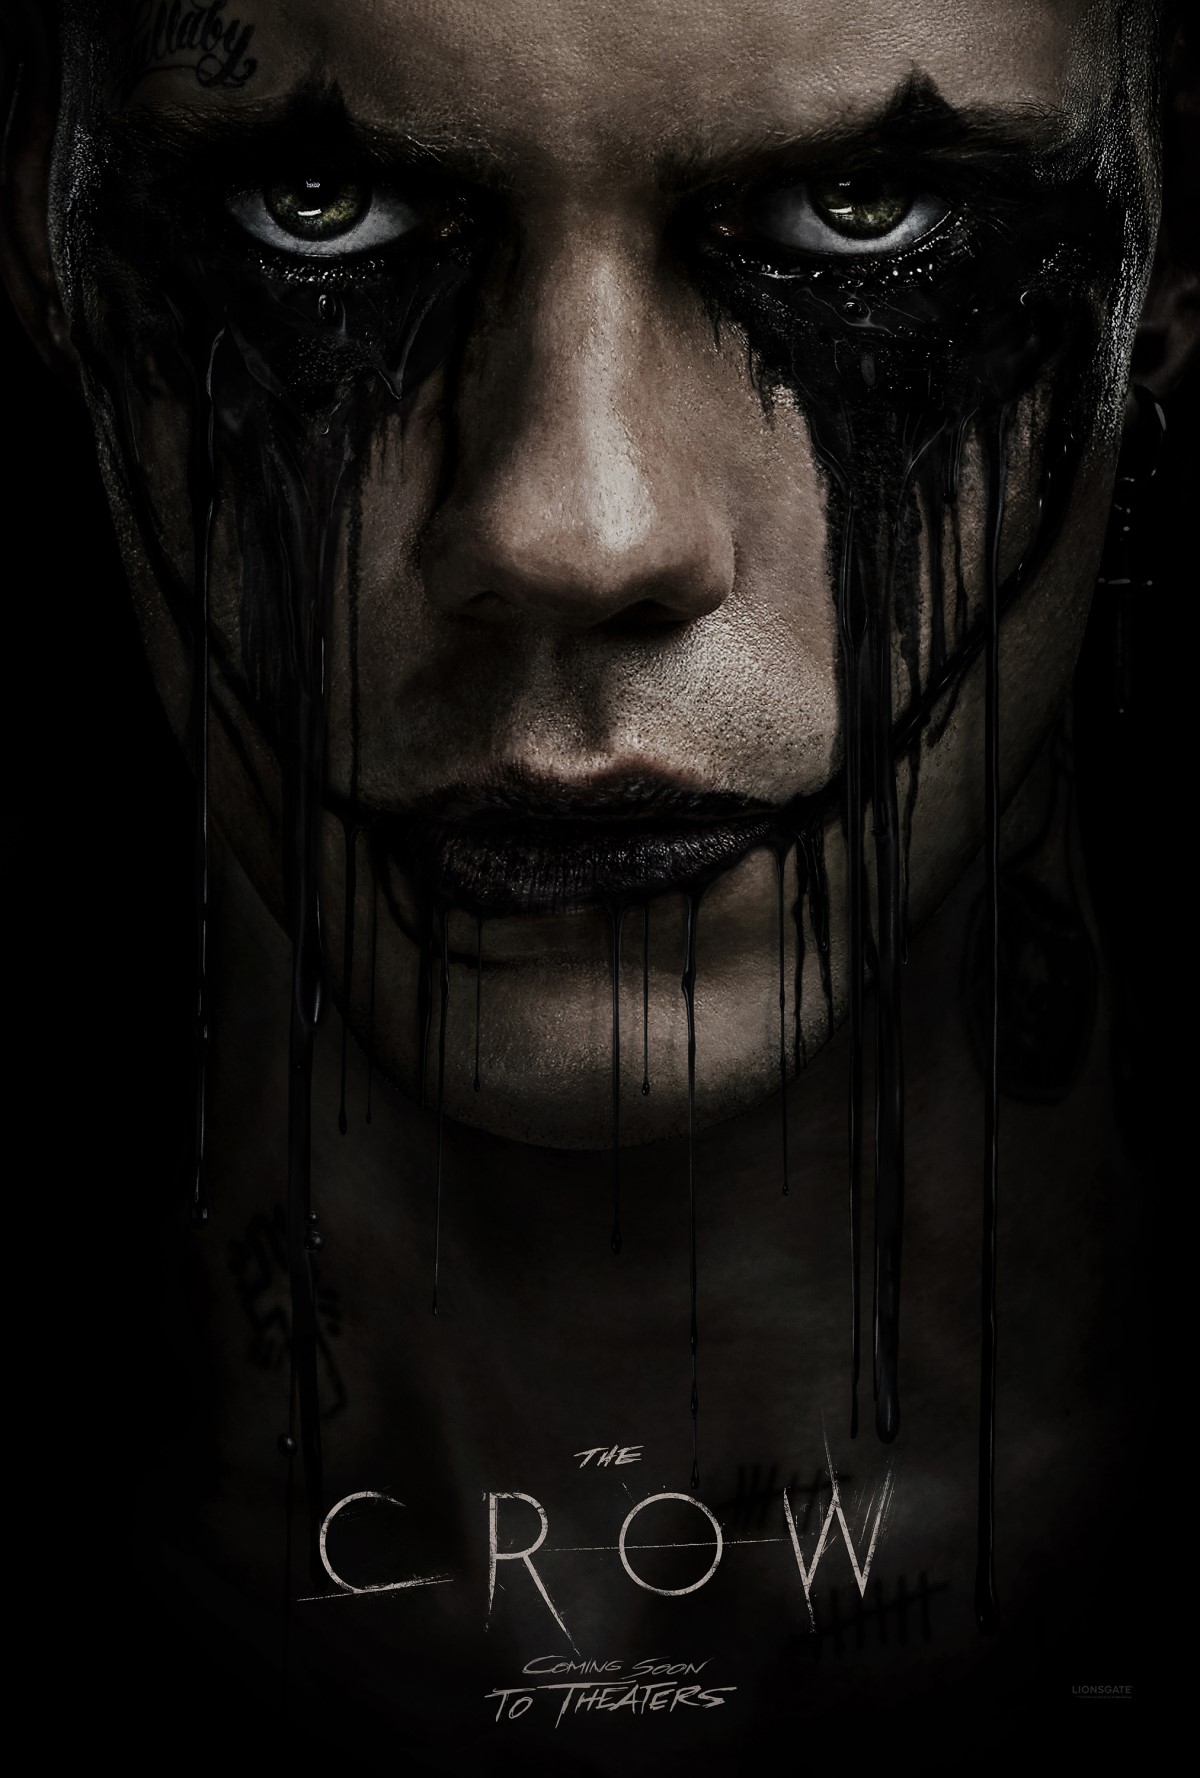 The Crow Remake Trailer & Poster